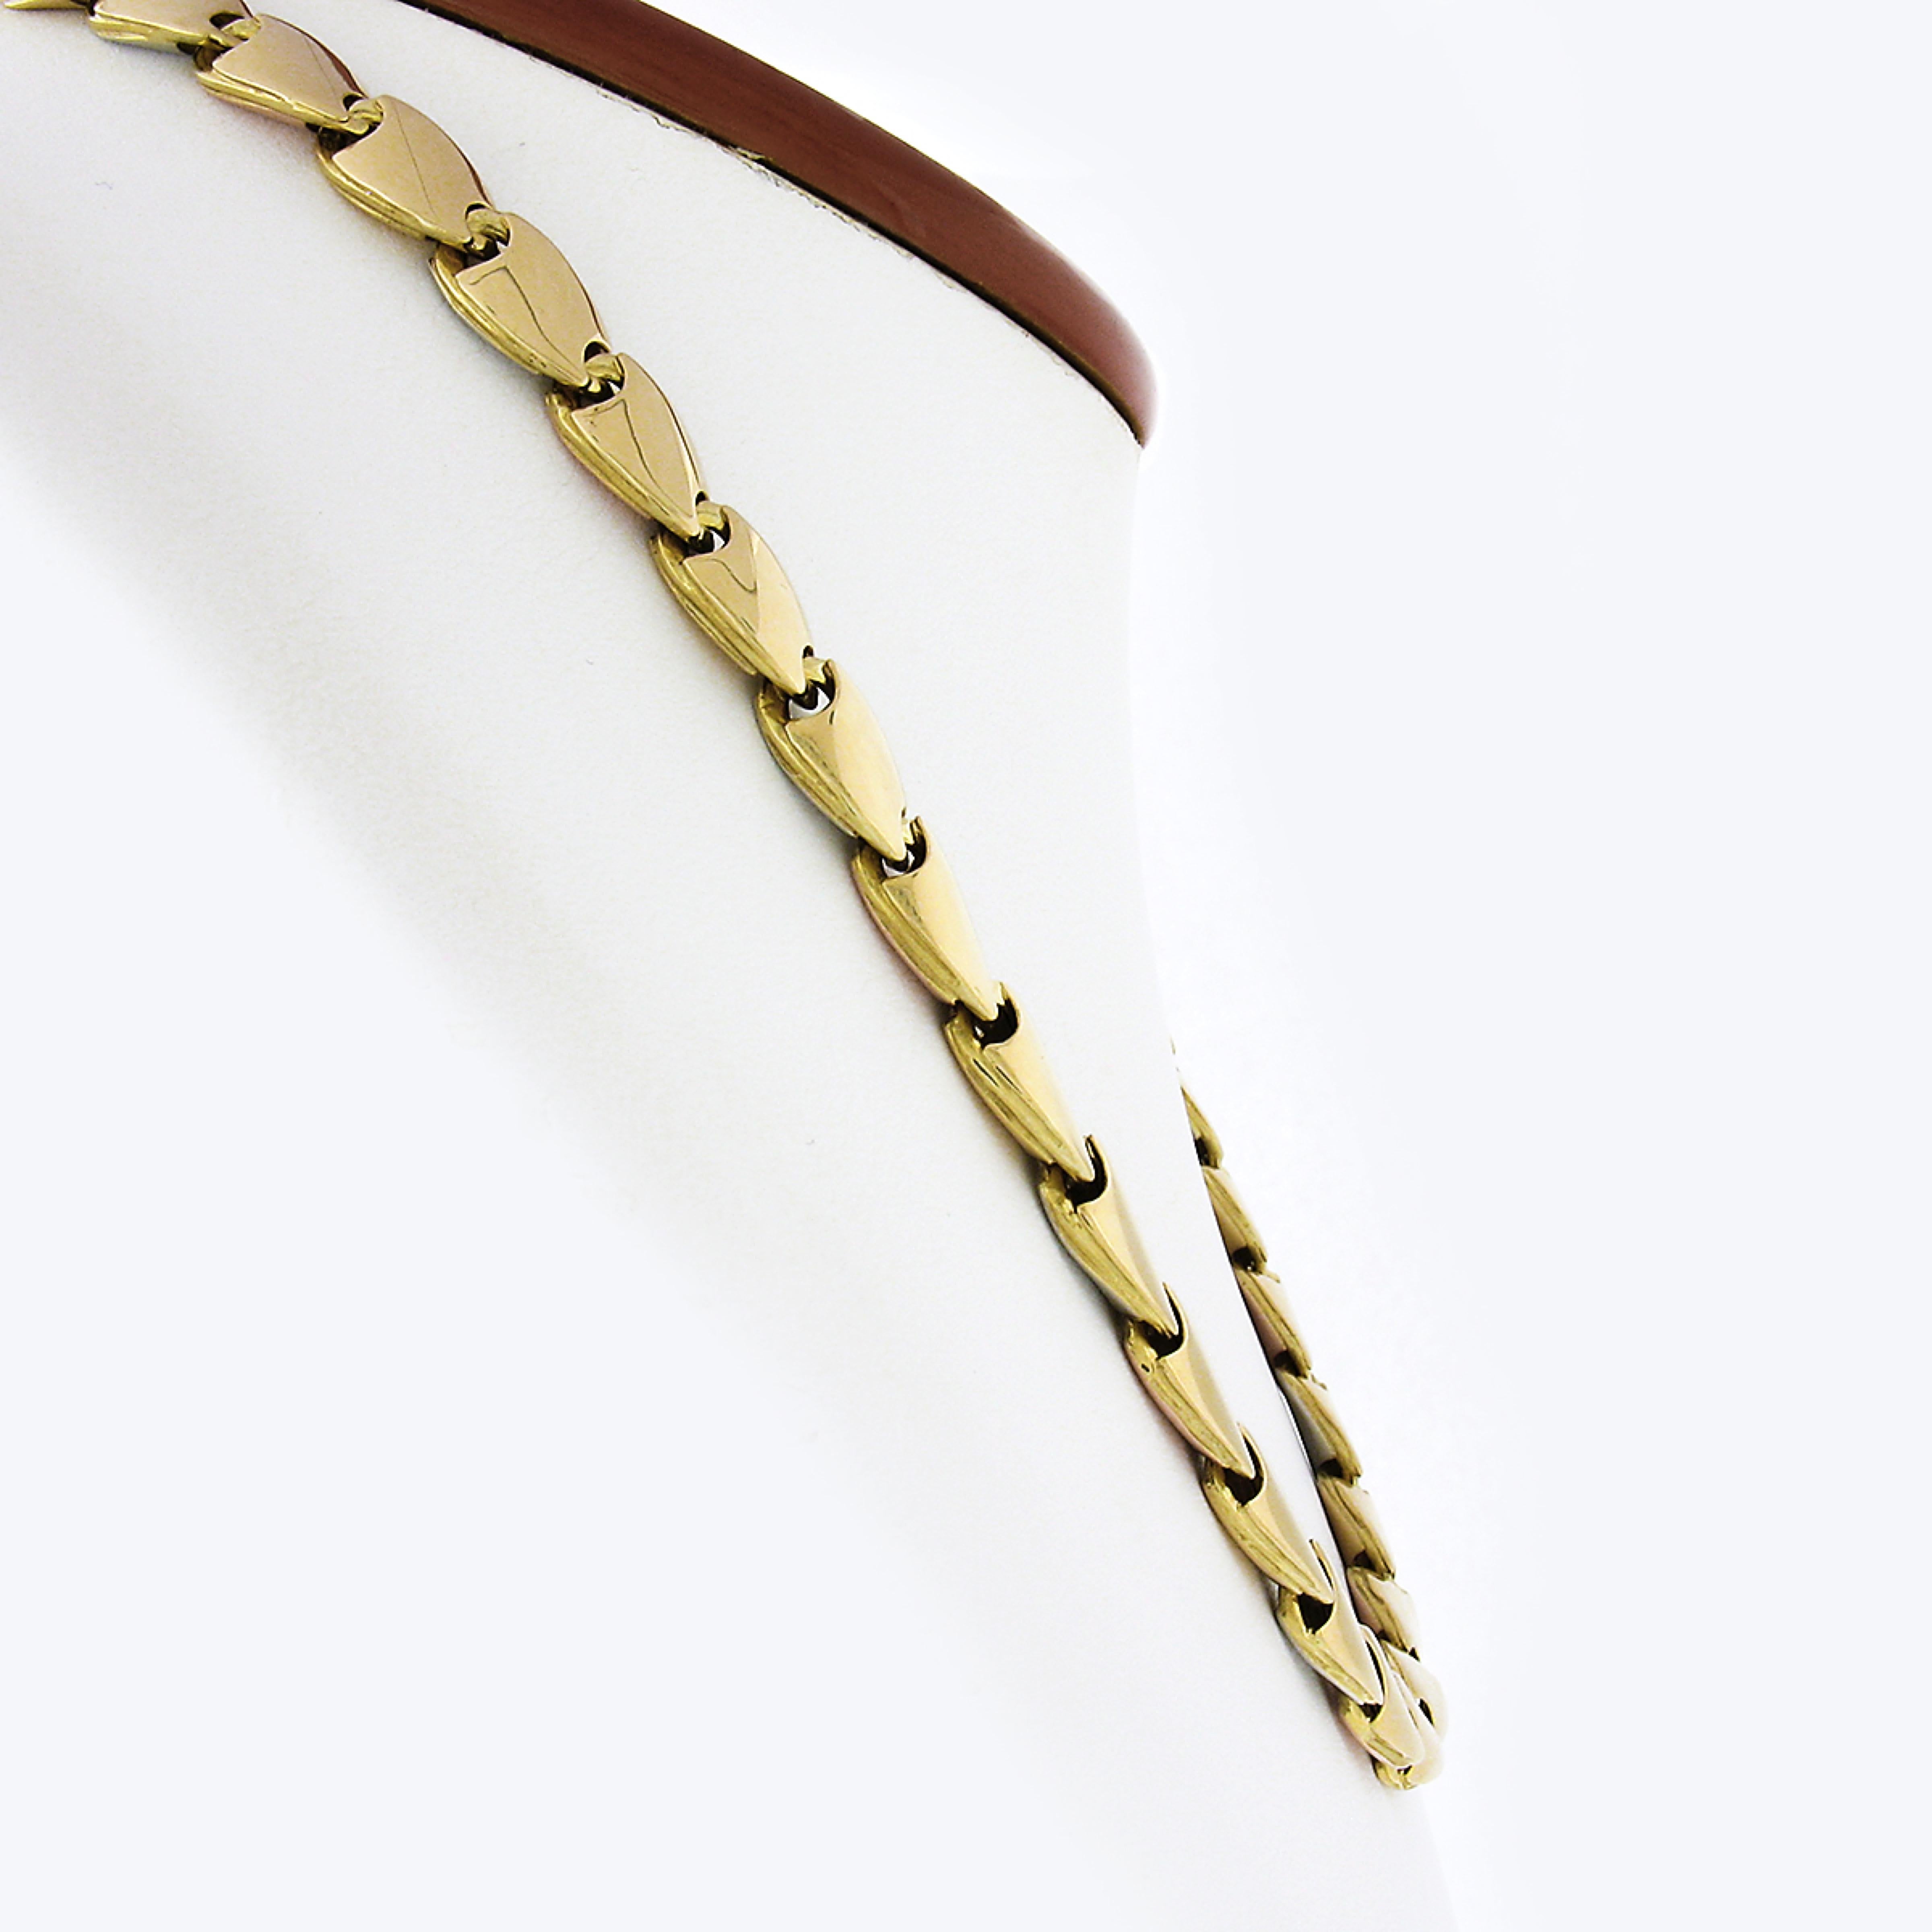 This gorgeous necklace was crafted in Italy from solid 18k yellow, white, and rose gold. It is reversible in design and feature two different patterns. On one side the links are all yellow gold and on the other side the links cycle through a pattern